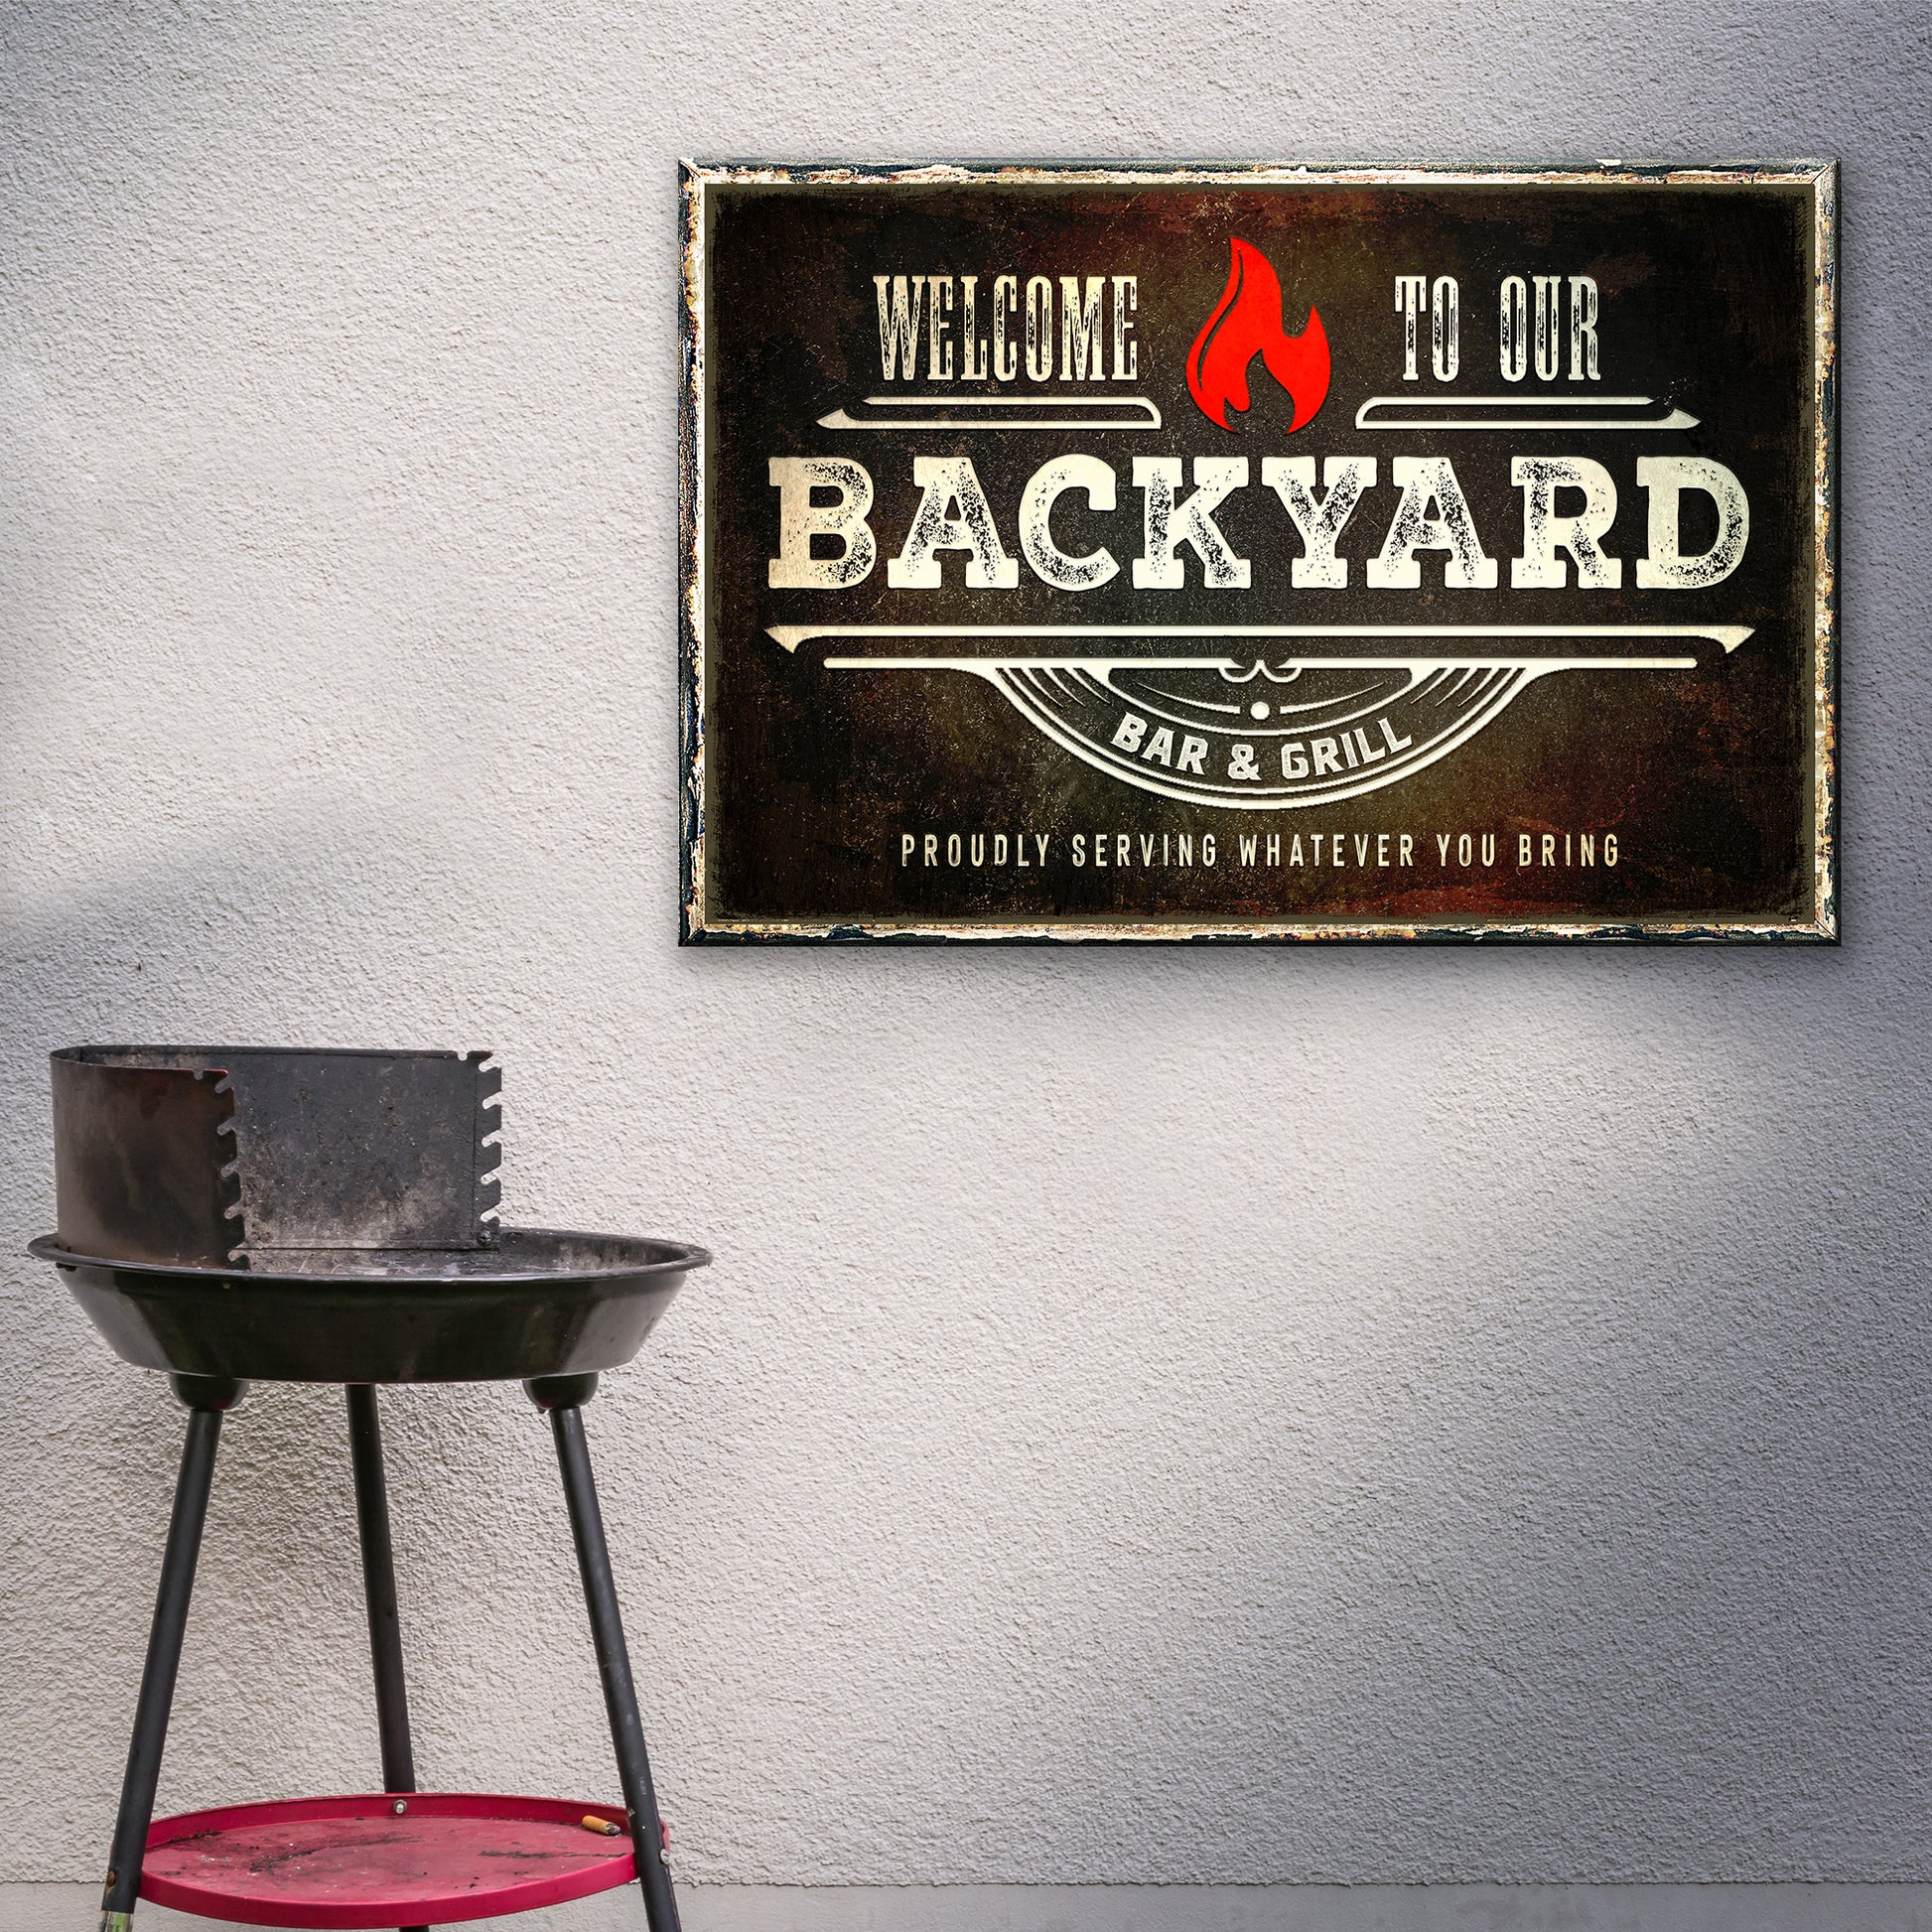 Welcome To Our Backyard Bar & Grill Sign III - Image by Tailored Canvases